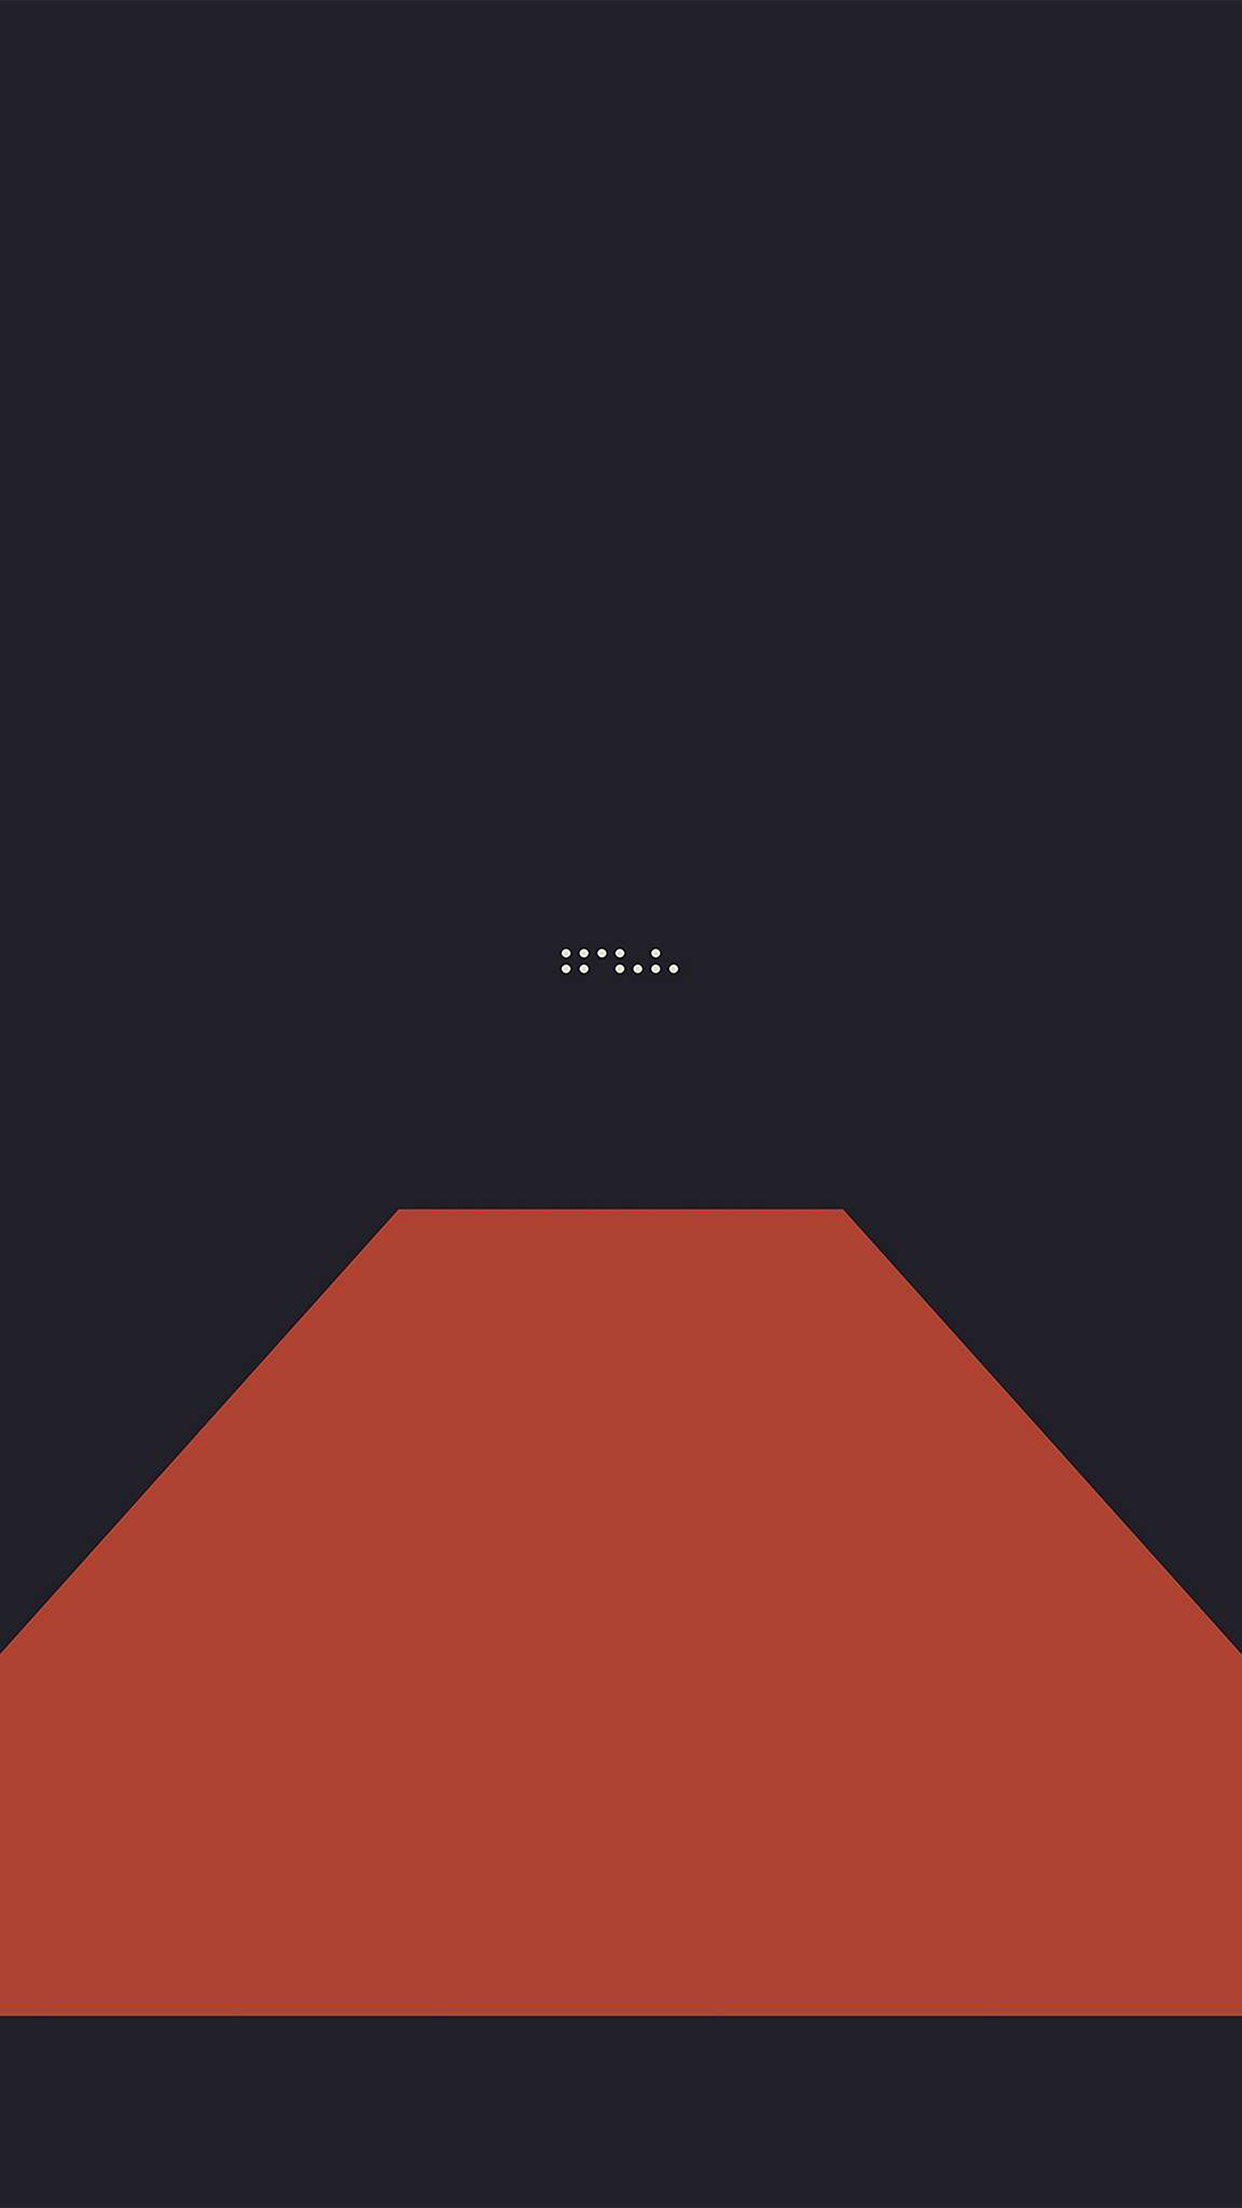 Simple Tycho Red Dark Abstract Minimal Art Illustration Android wallpaper